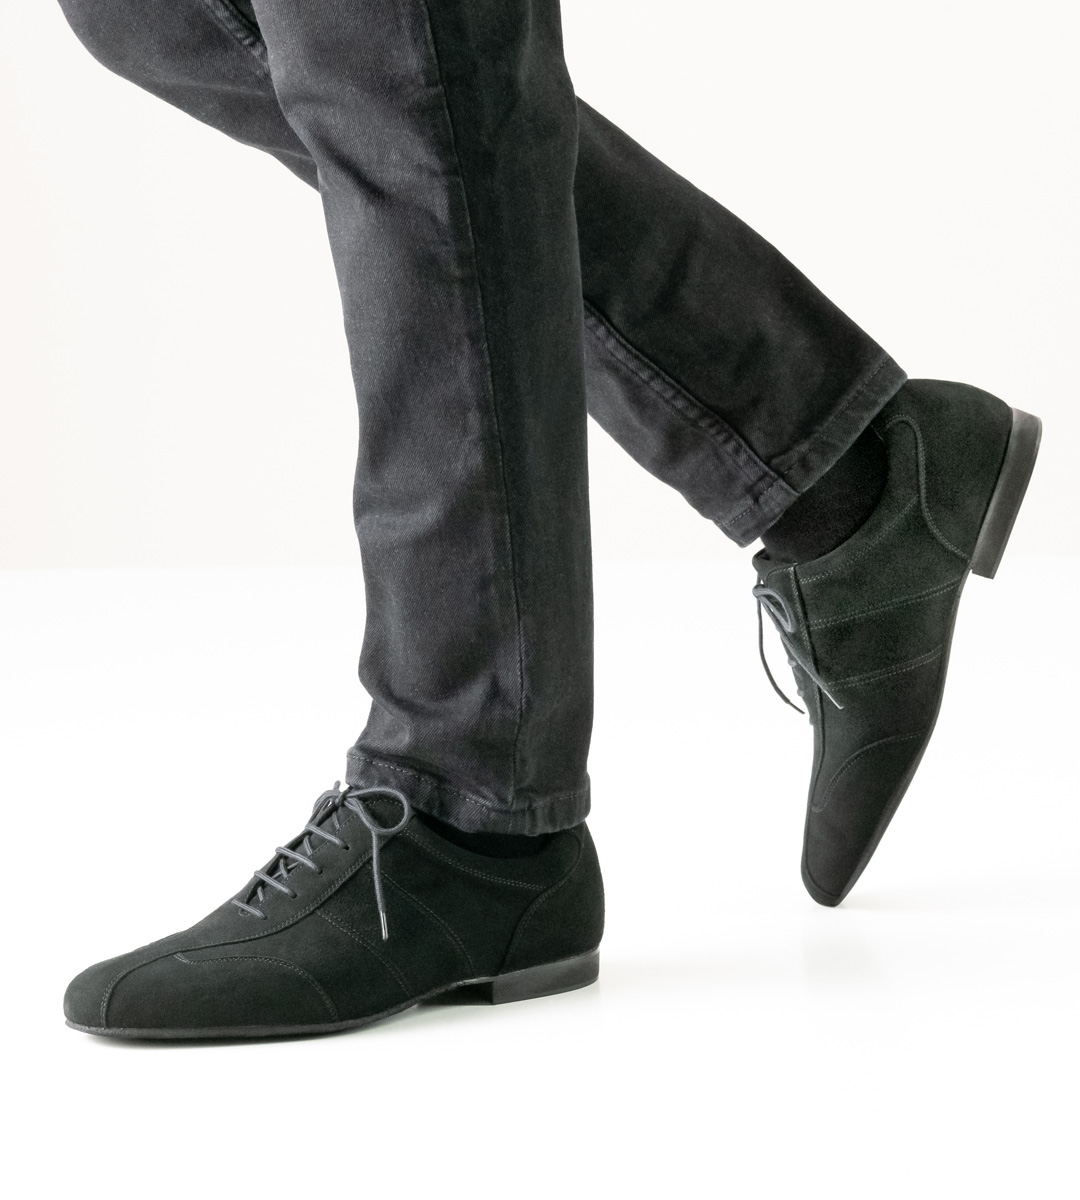 1.5 cm high Werner Kern men's dance shoe in combination with grey trousers